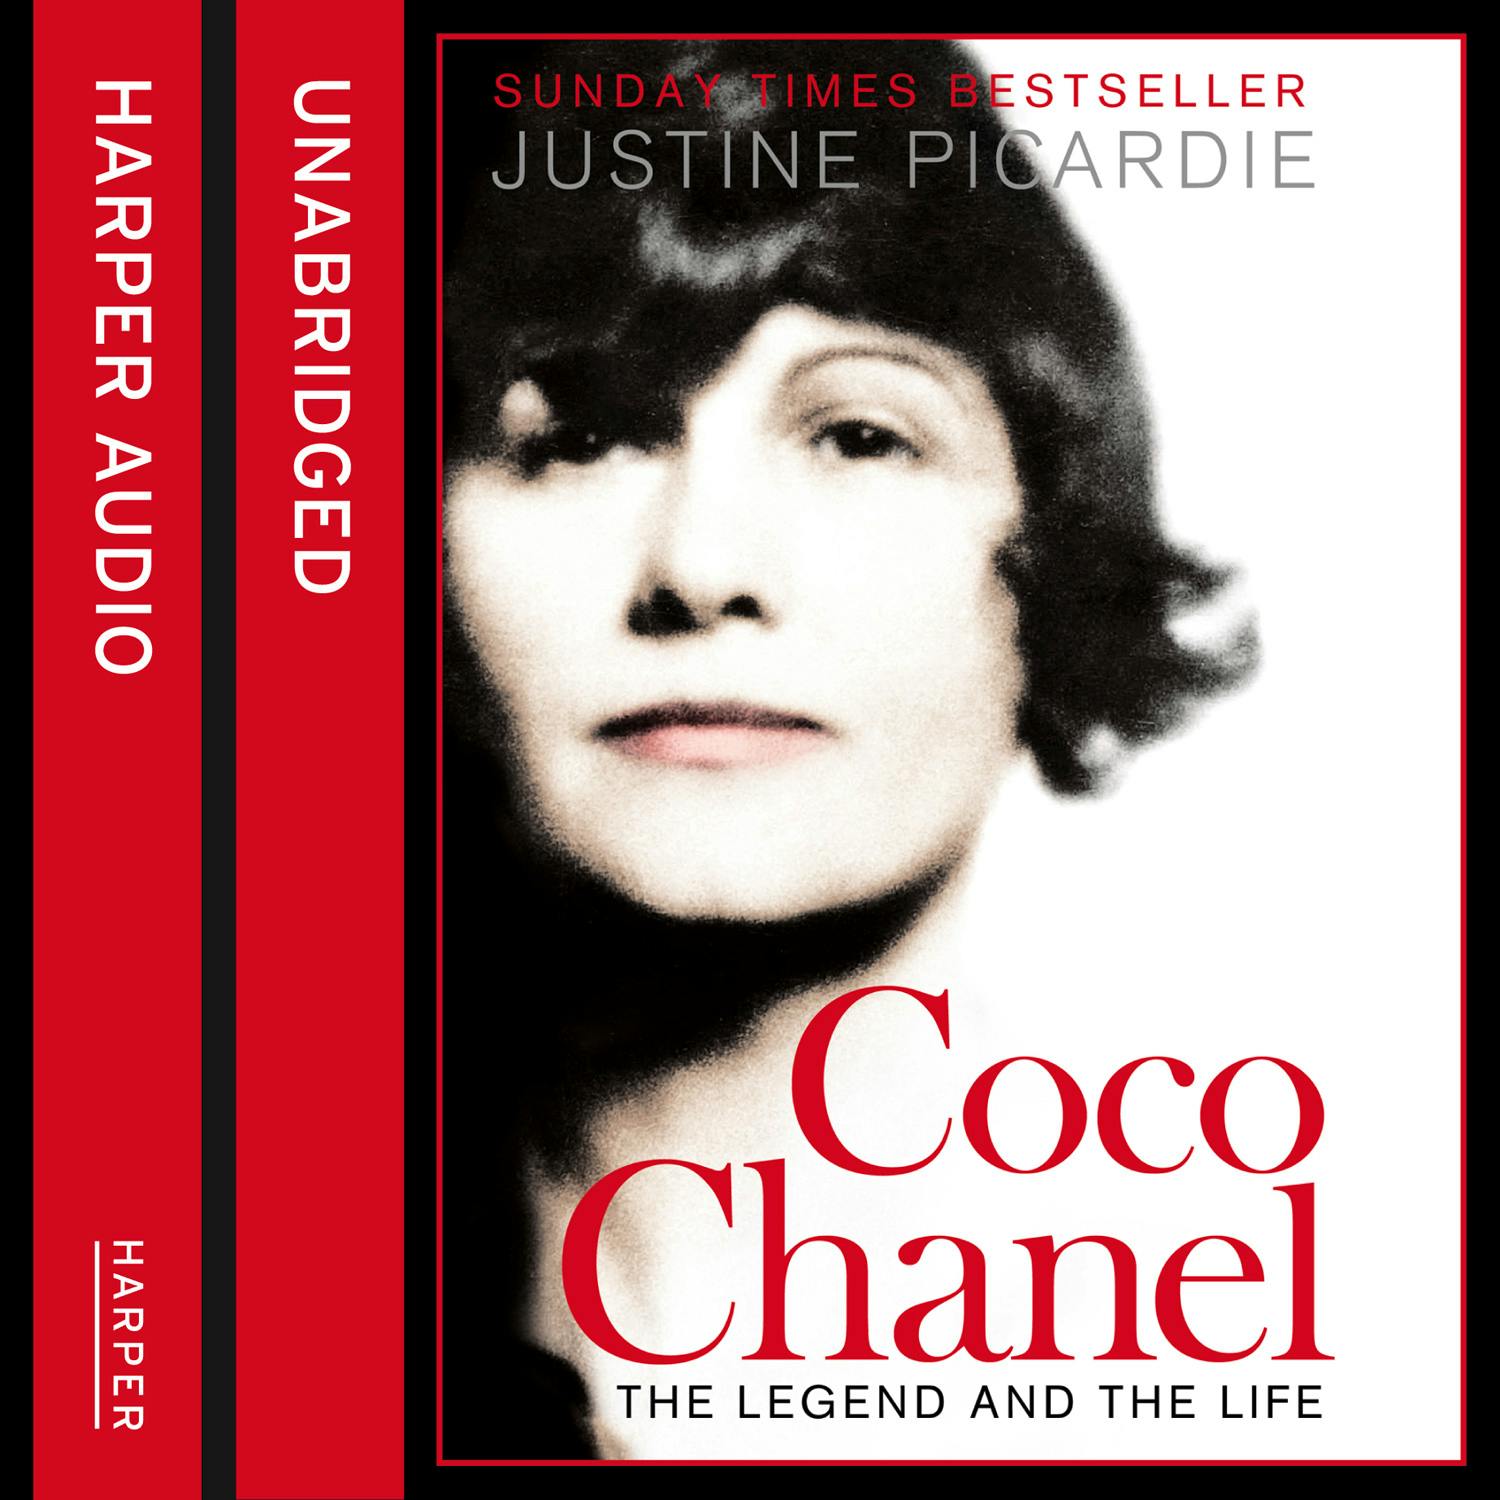 Coco Chanel: The Legend And The Life, Ljudbok, Justine Picardie